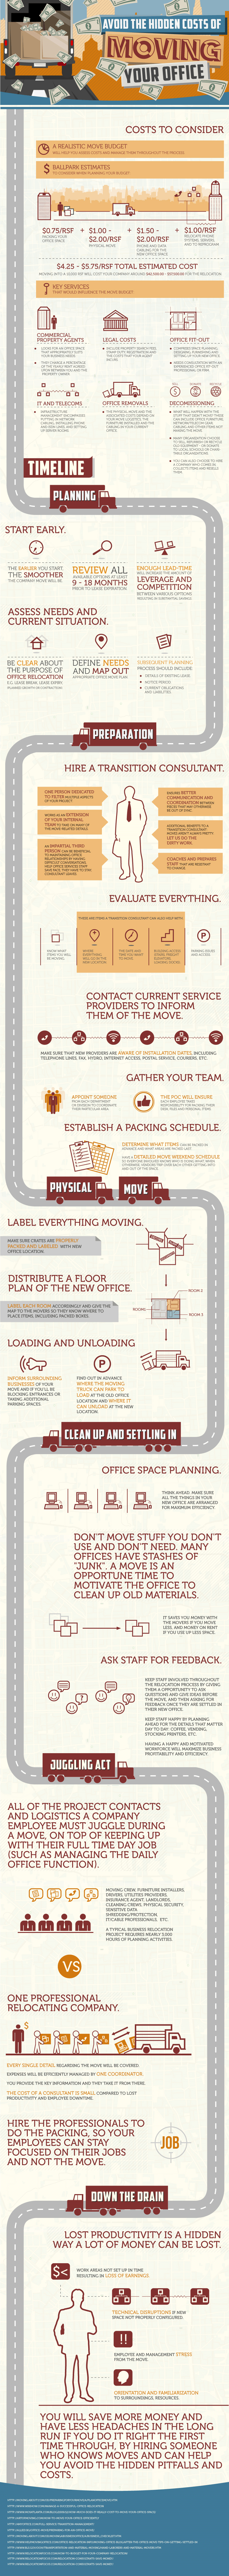 moveinfographic